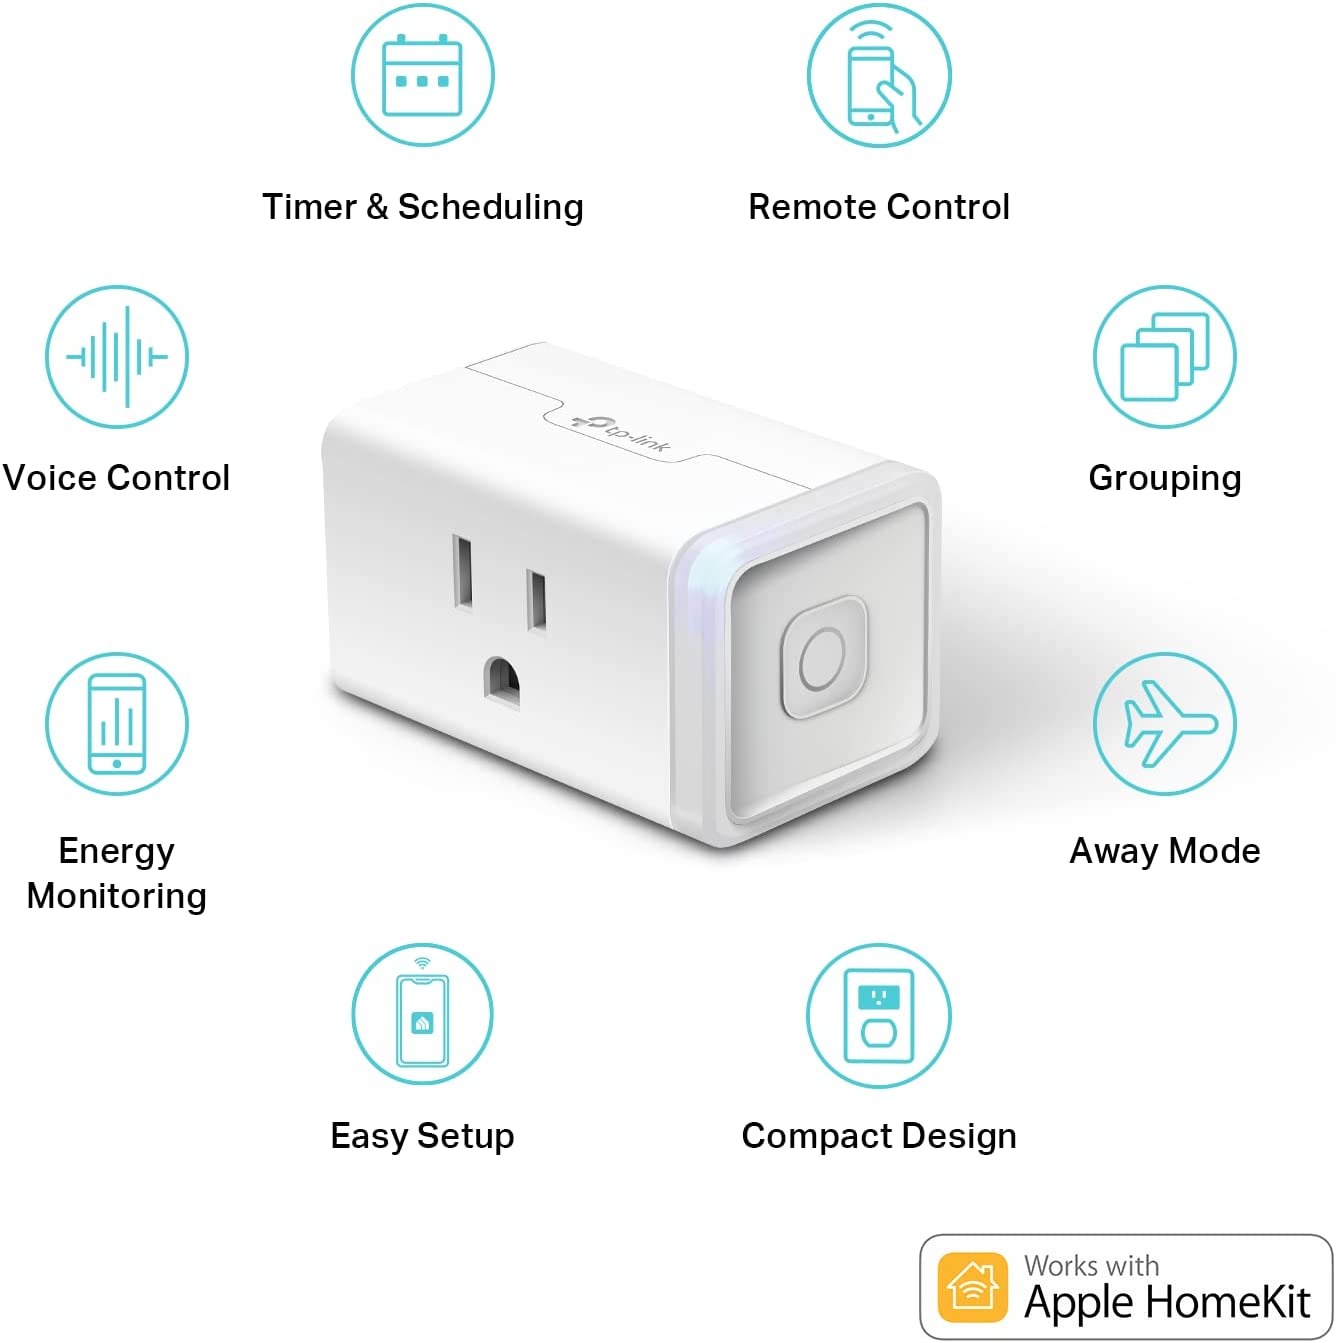 Kasa Smart Plug Mini 15A, Apple HomeKit Supported, Smart Outlet Works with Siri, Alexa & Google Home, No Hub Required, UL Certified, App Control, Scheduling, Timer, 2.4G WiFi Only, 4-Pack (EP25P4)